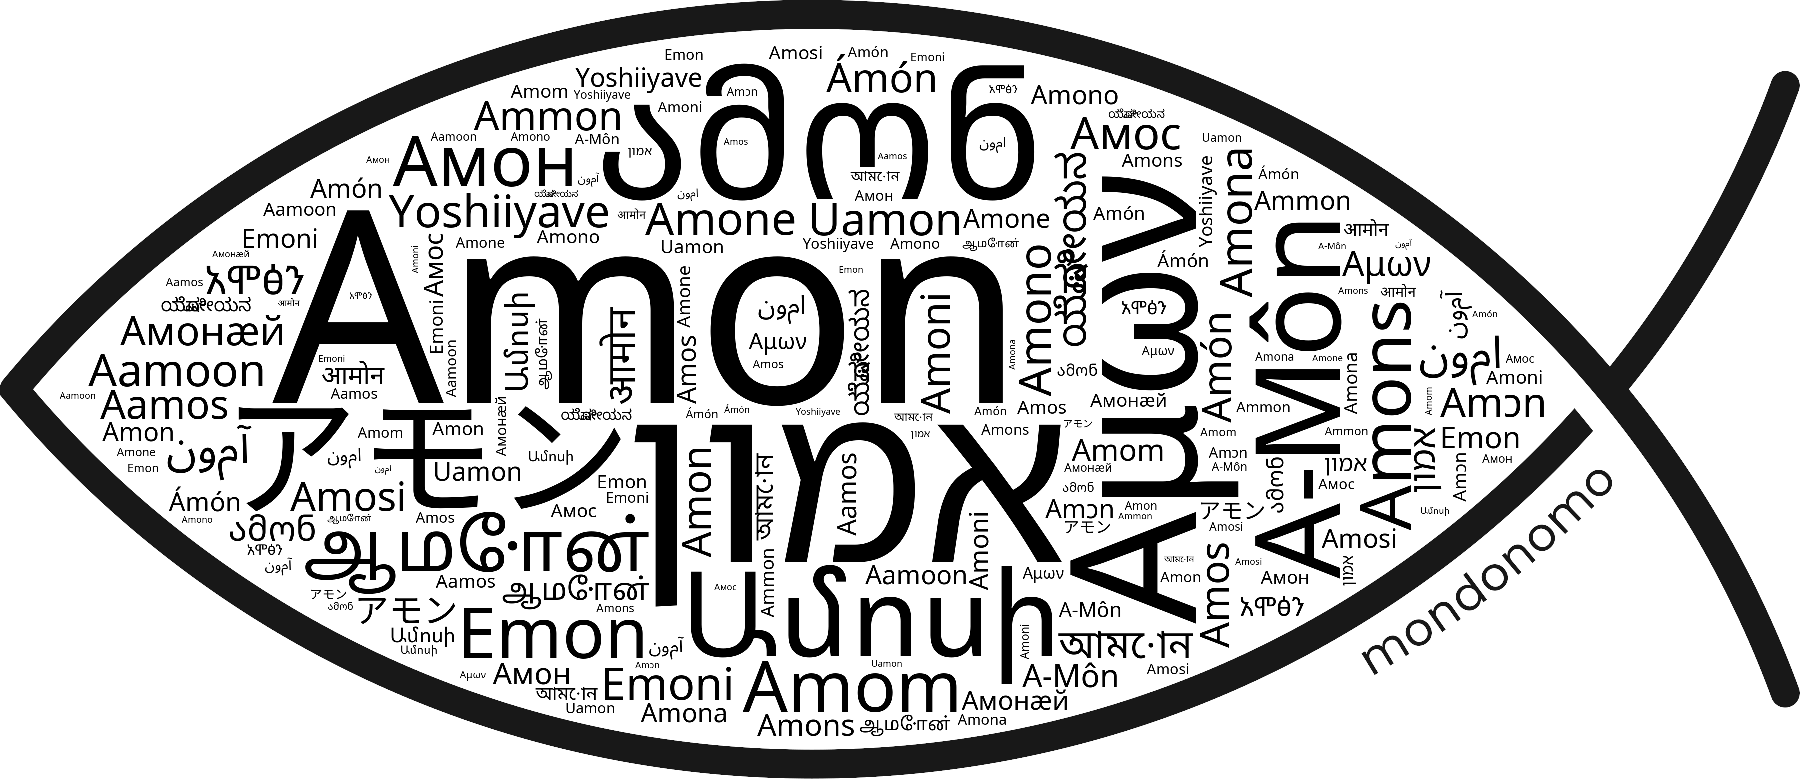 Name Amon in the world's Bibles